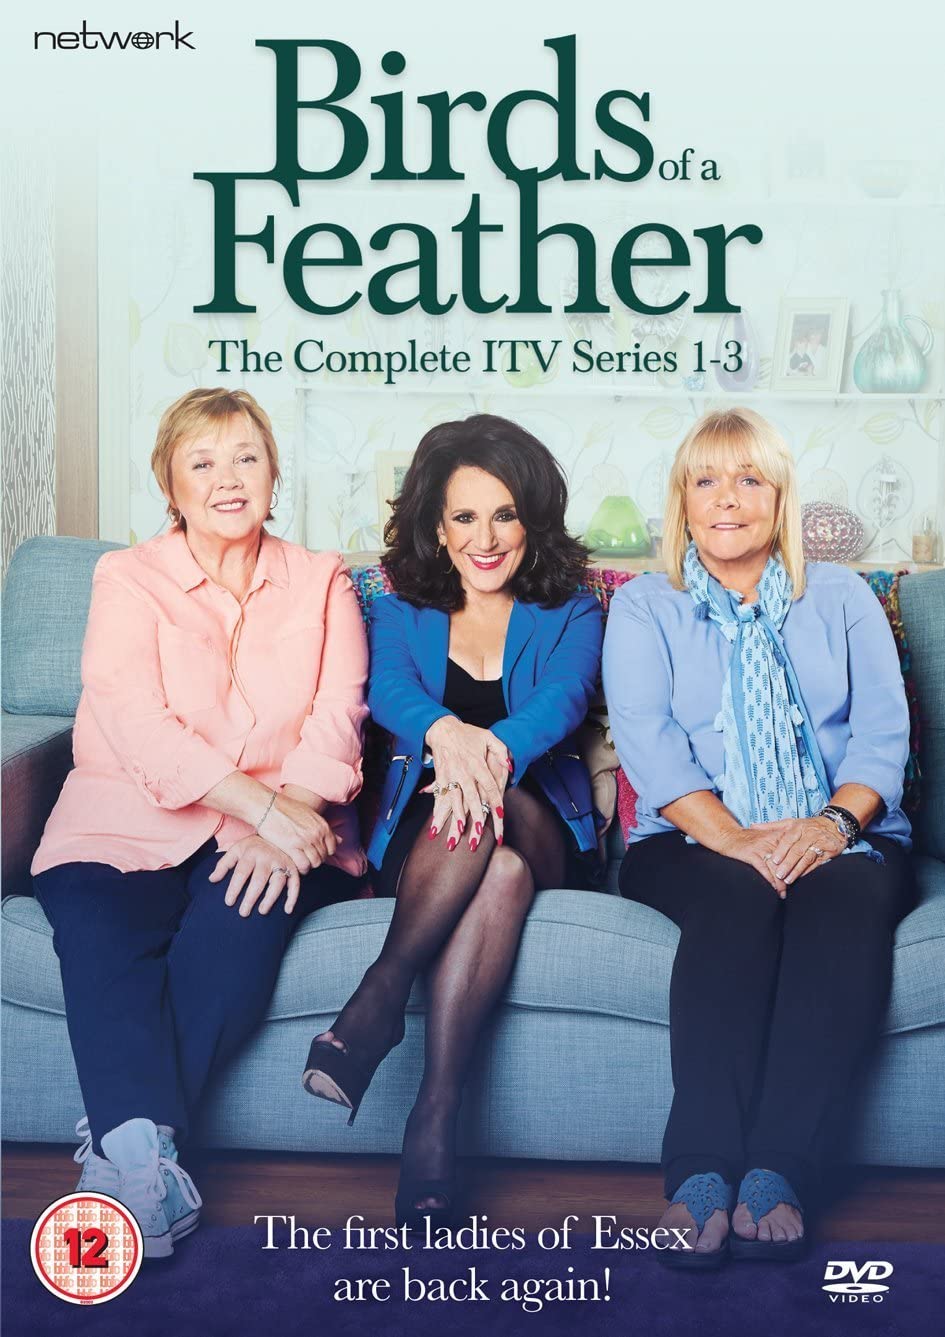 Birds of a Feather: The Complete ITV Series 1 to 3 - Drama [DVD]